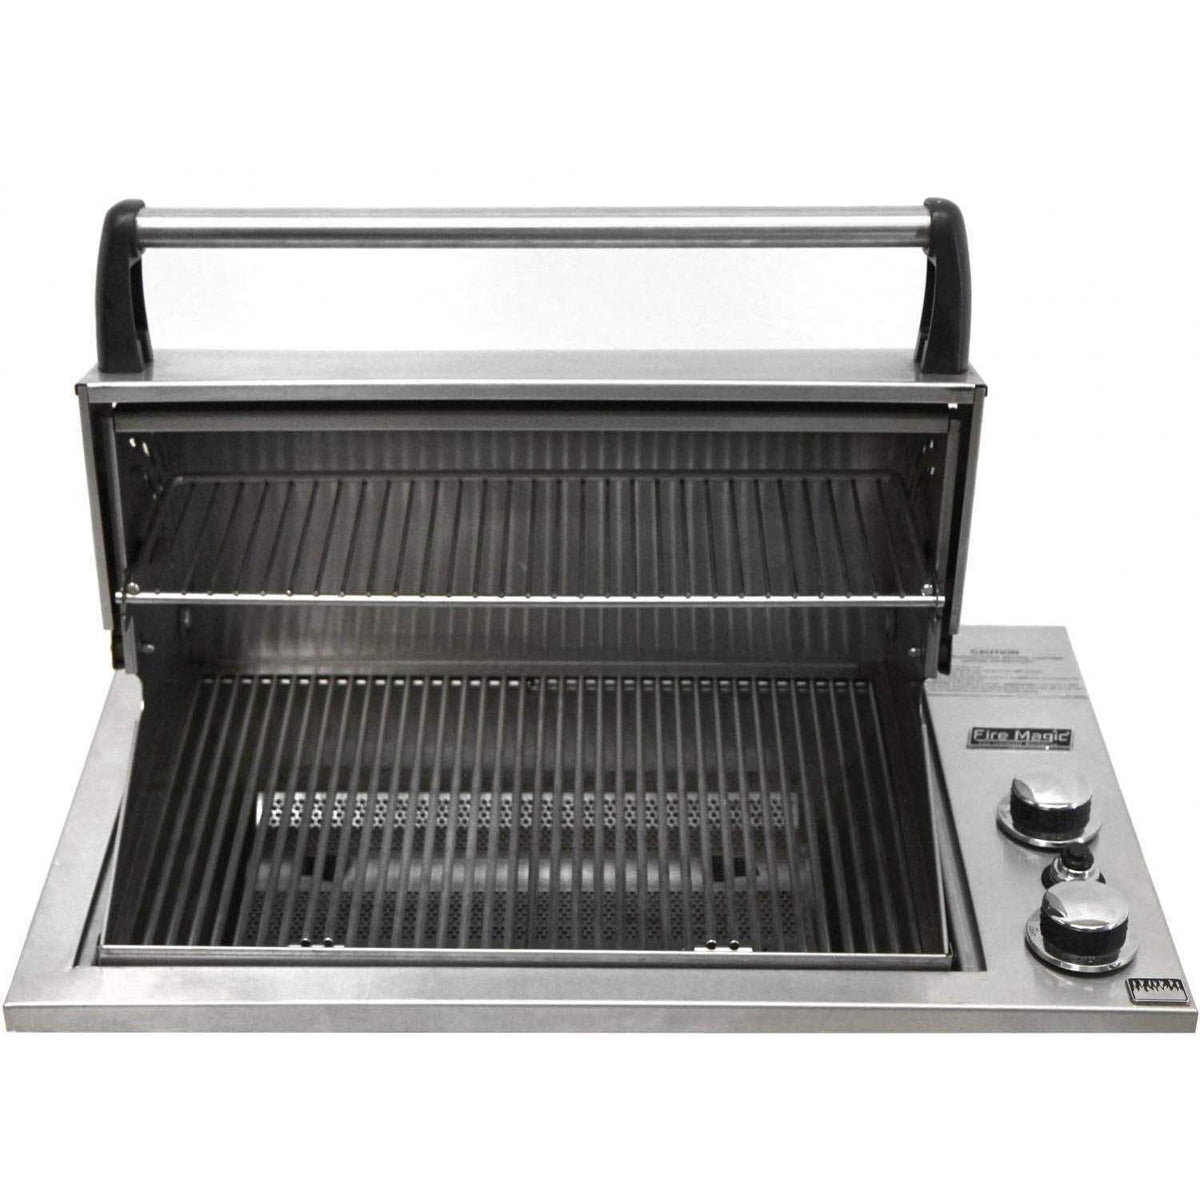 Fire Magic Deluxe Gourmet Legacy 24 Inch Drop-In Countertop Gas Grill